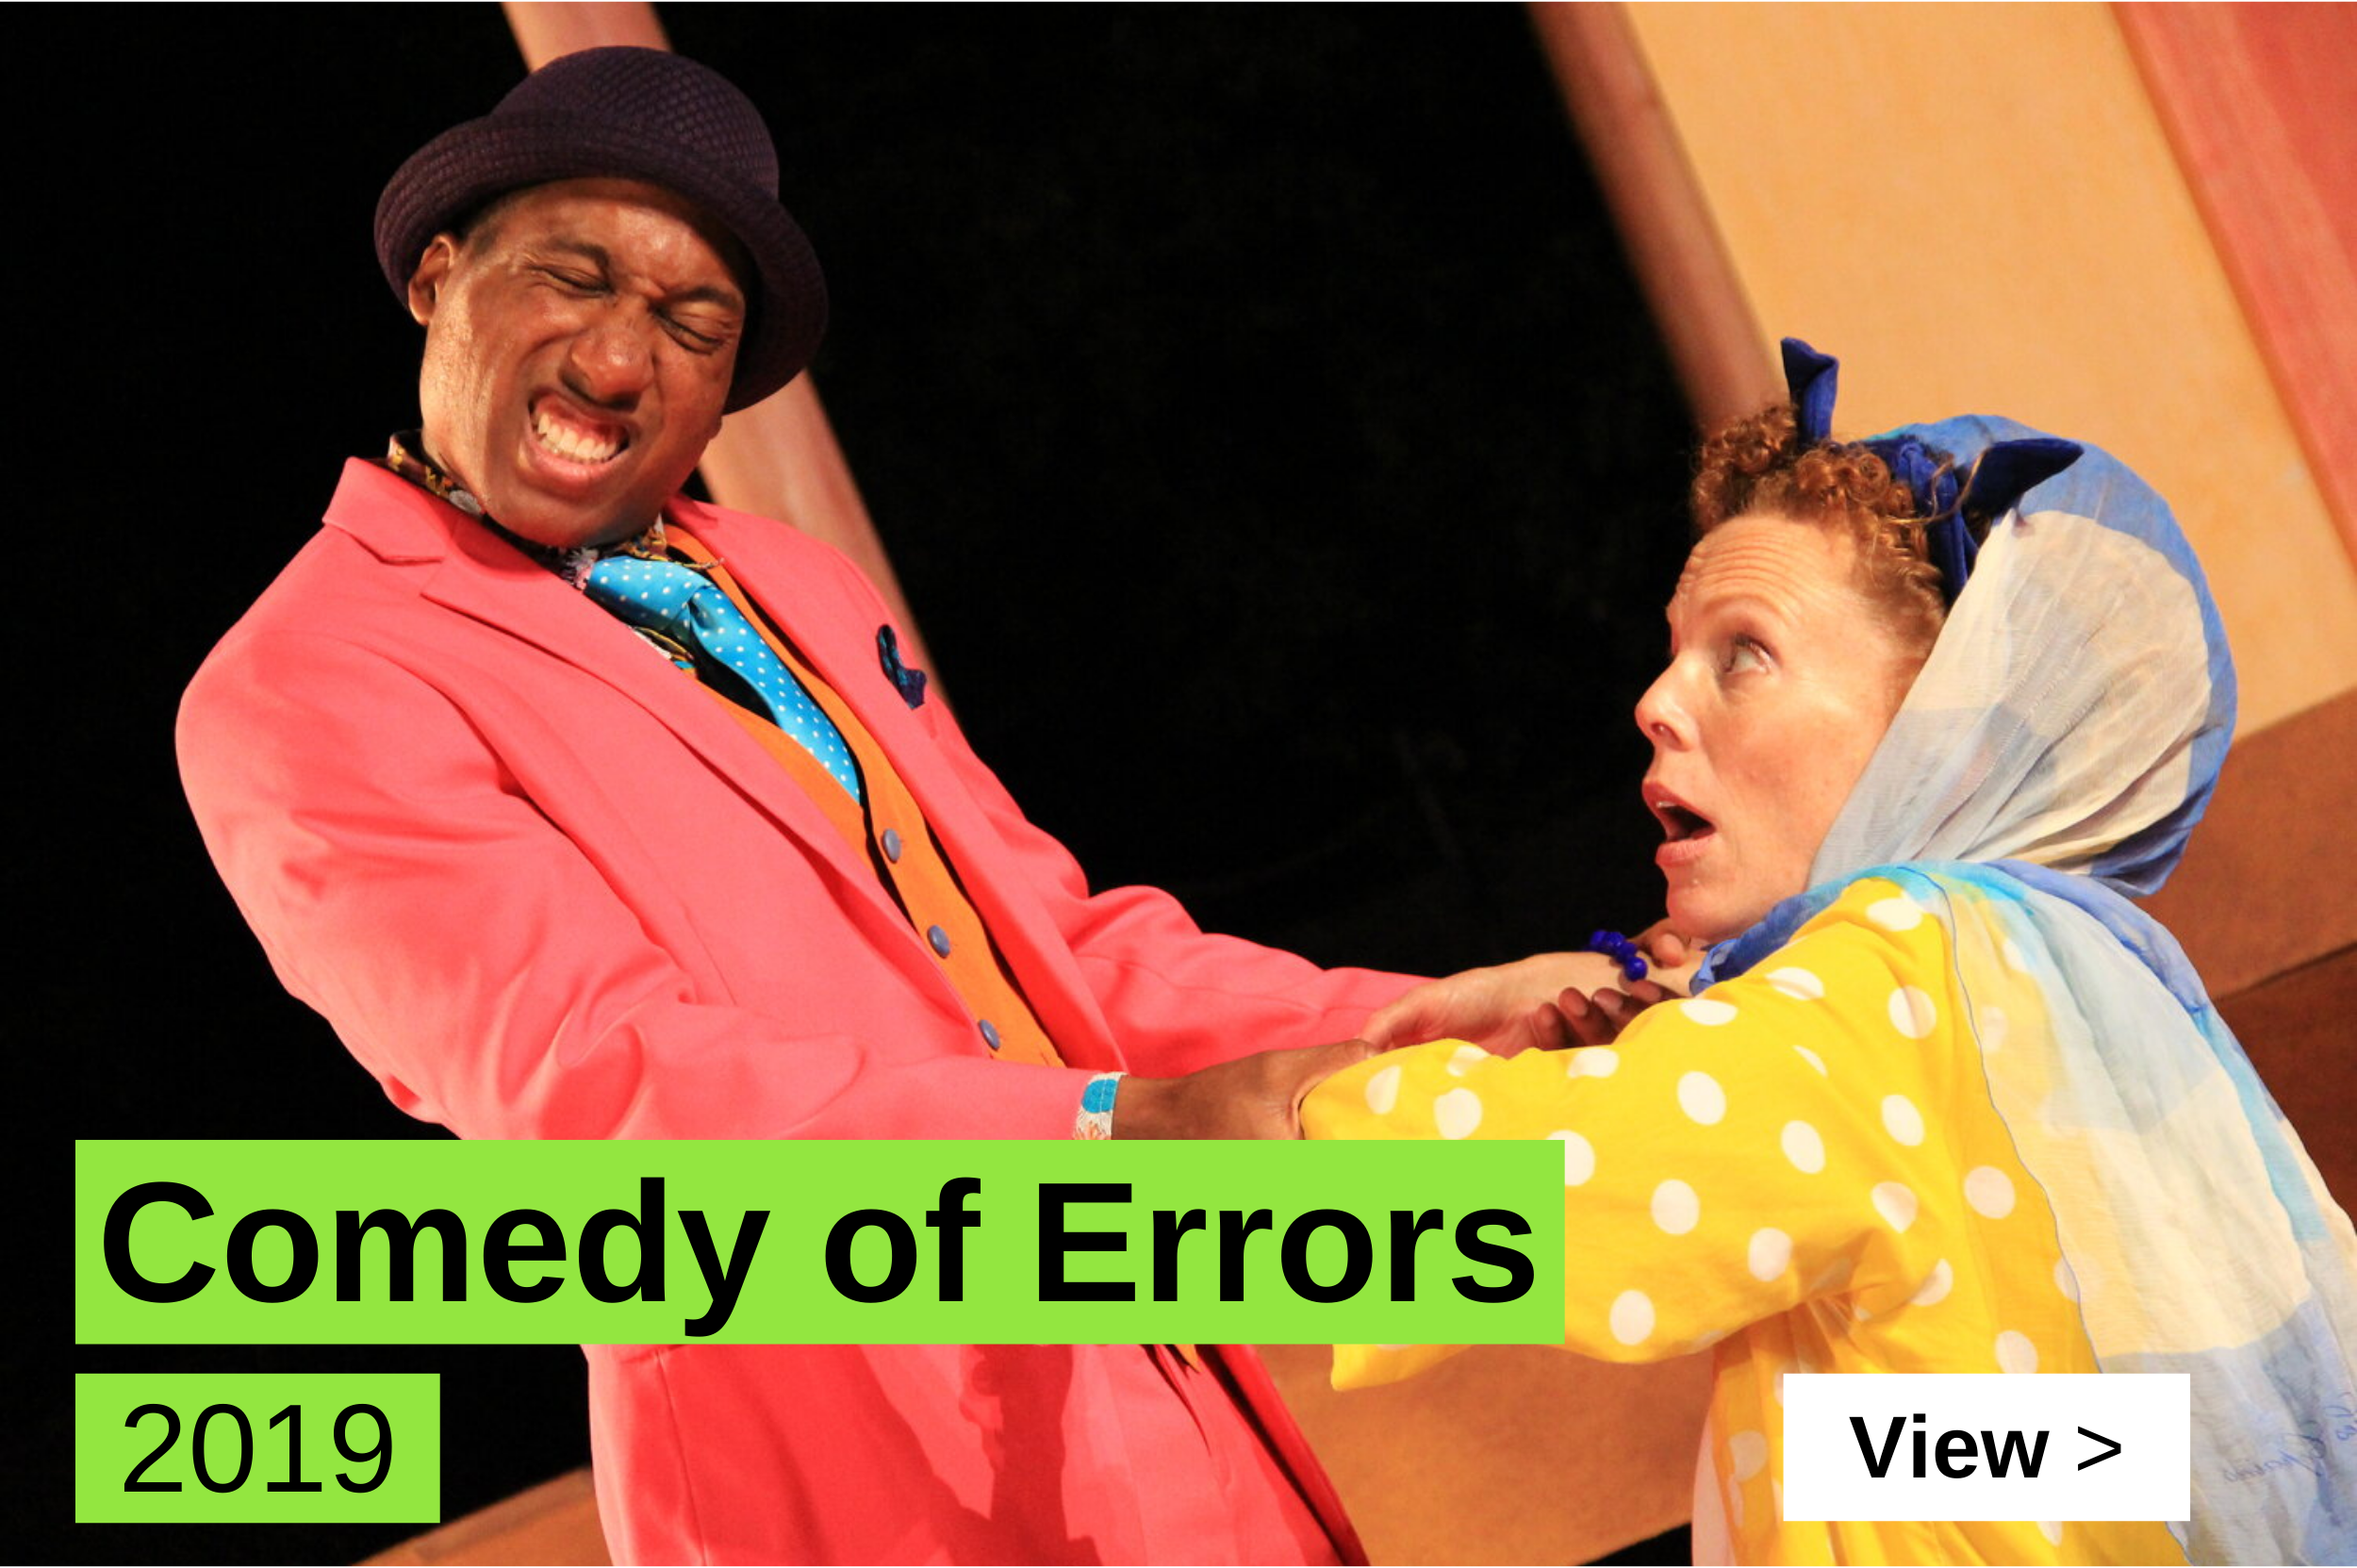 Comedy of Errors_gallery edit.png